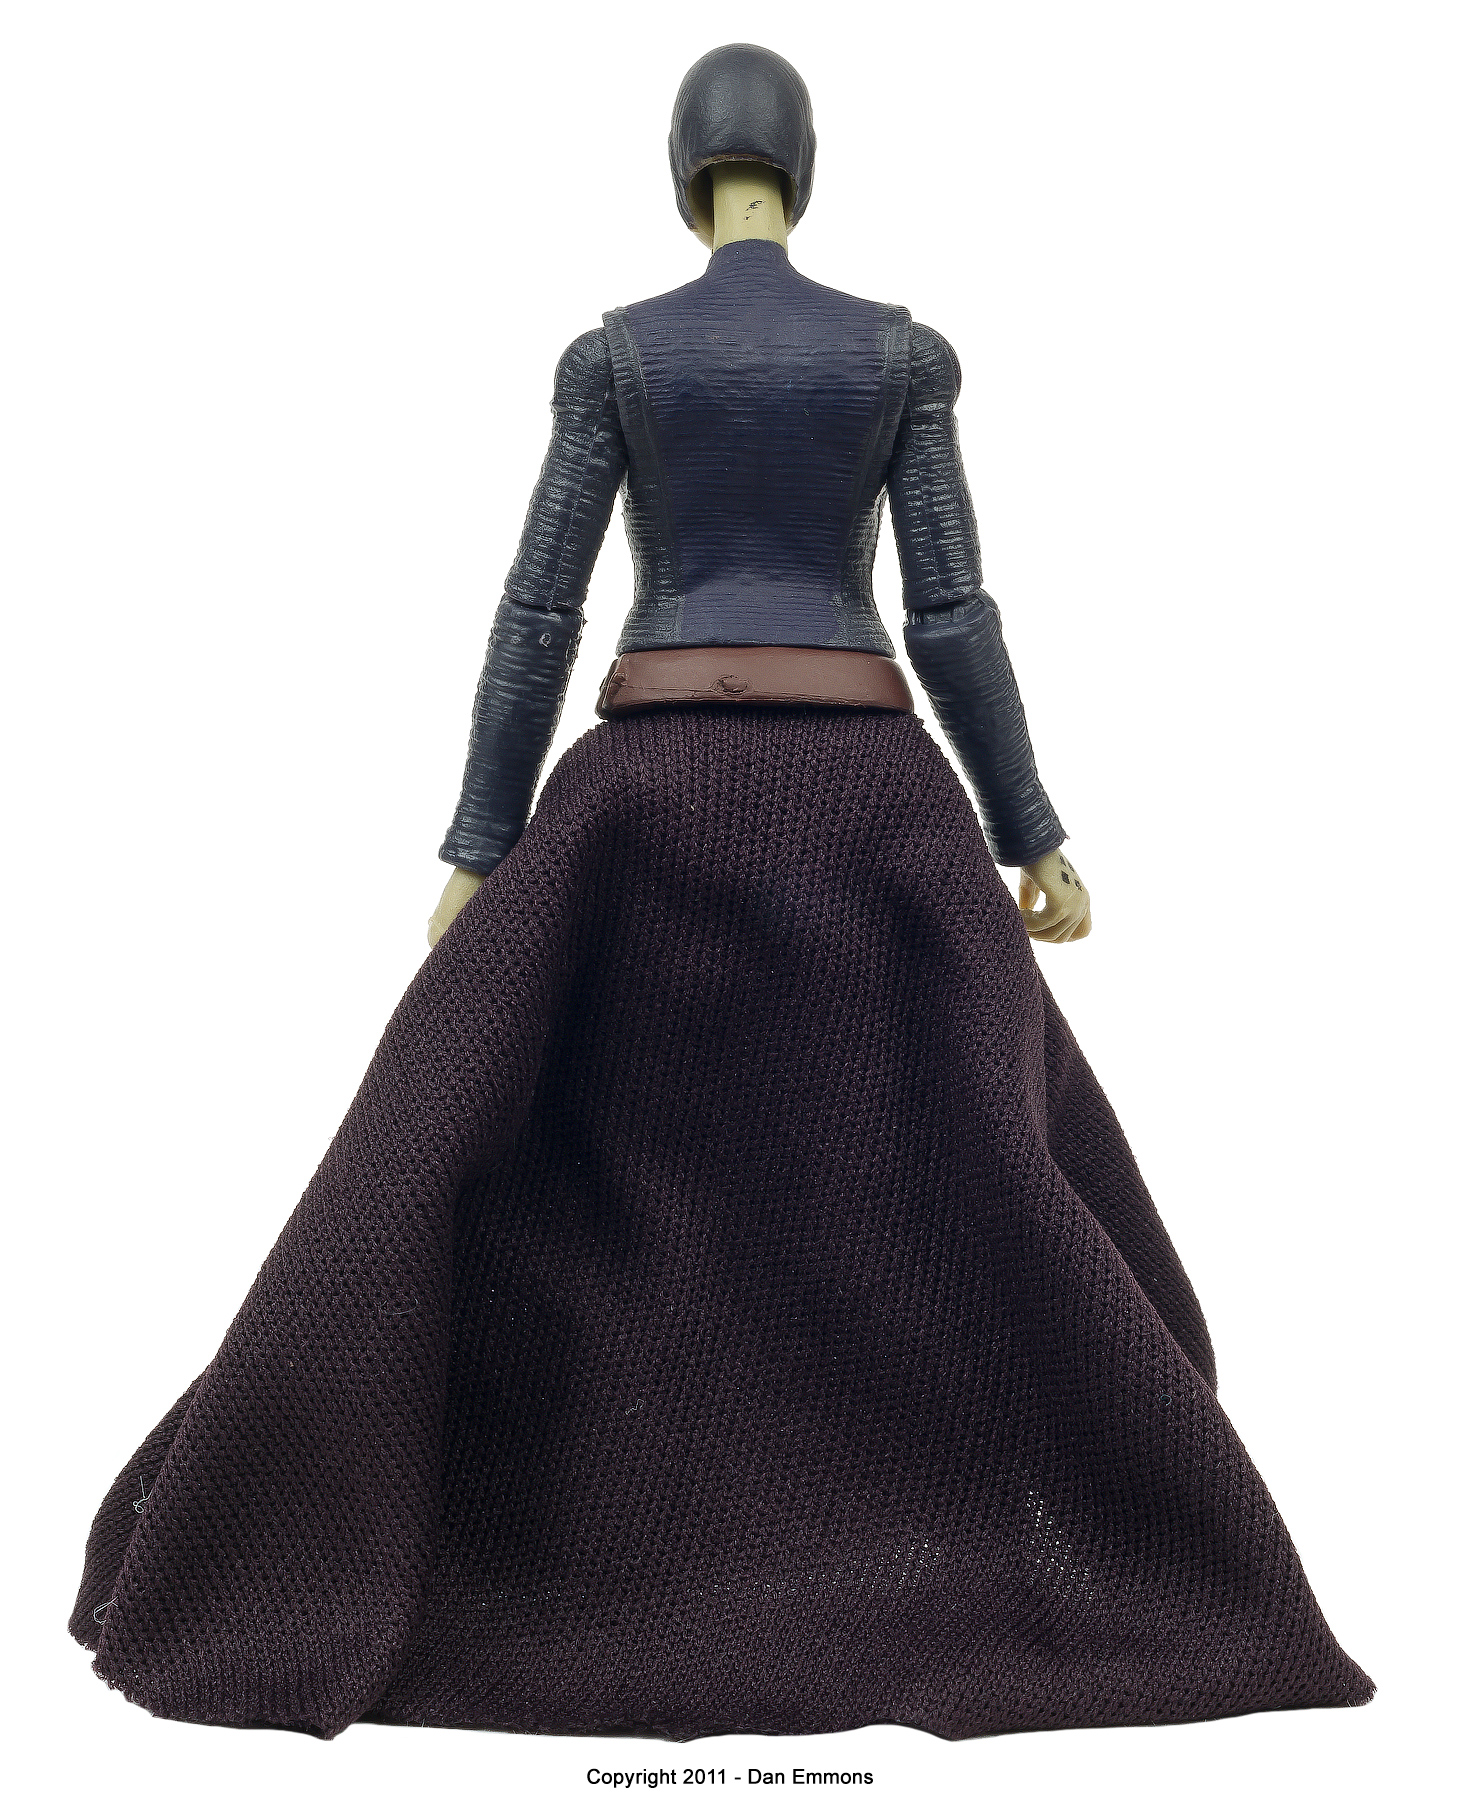 The Vintage Collection - VC51: Barriss Offee (Jedi Padawan)